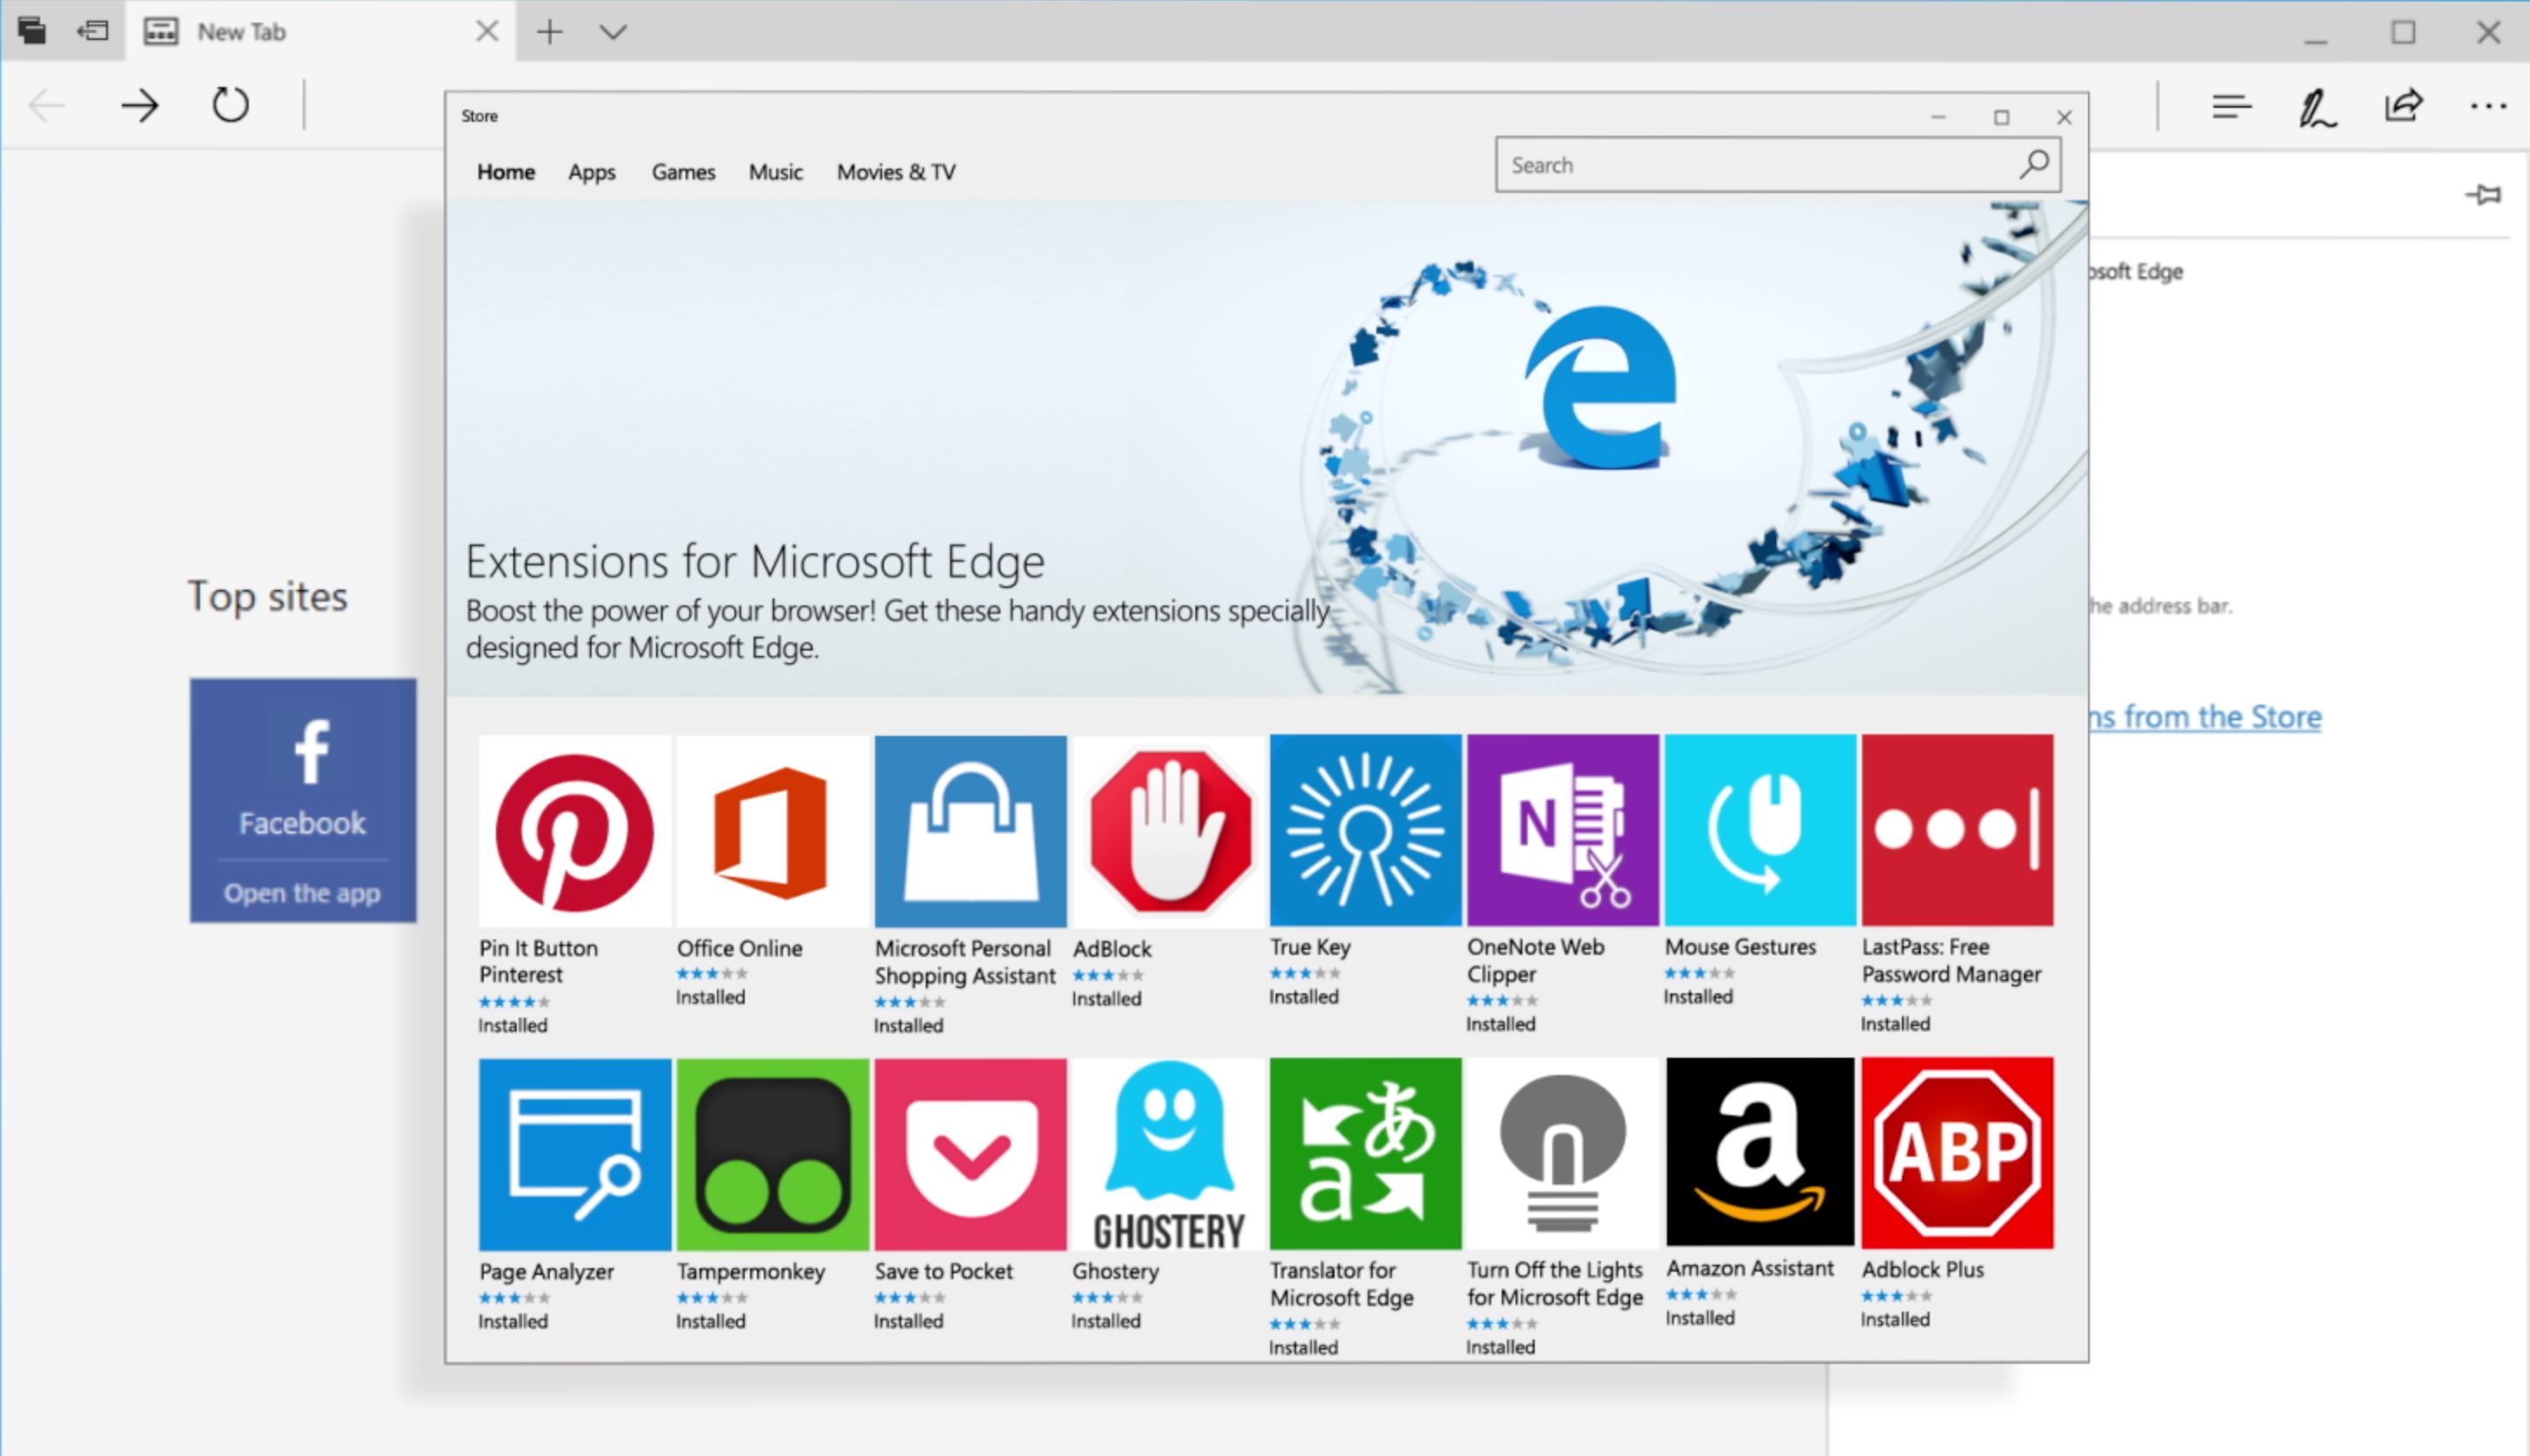 Extensions for Microsoft Edge in the Windows Store.